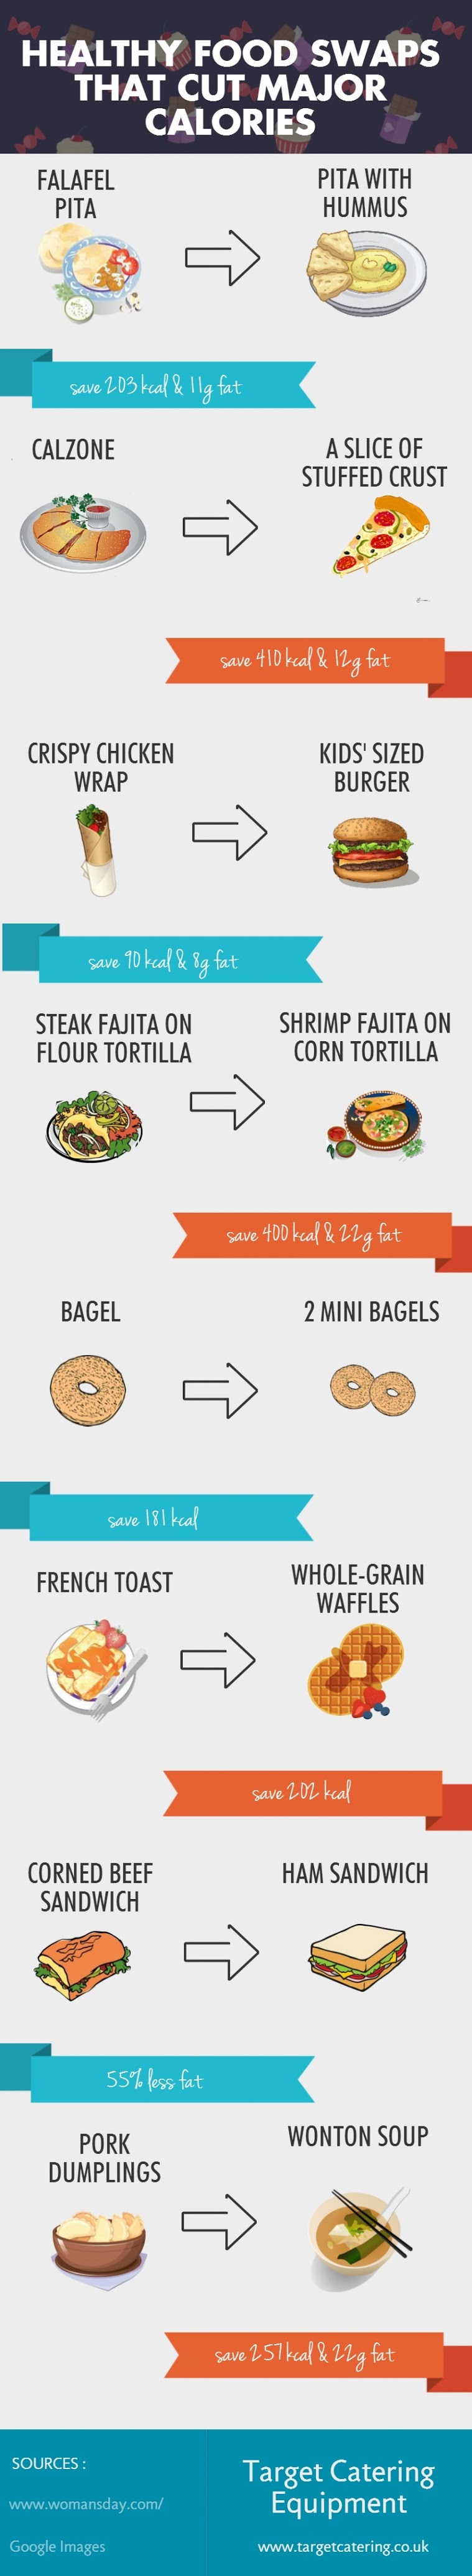 Healthy Food Swaps That Cut Major Calories #infographic